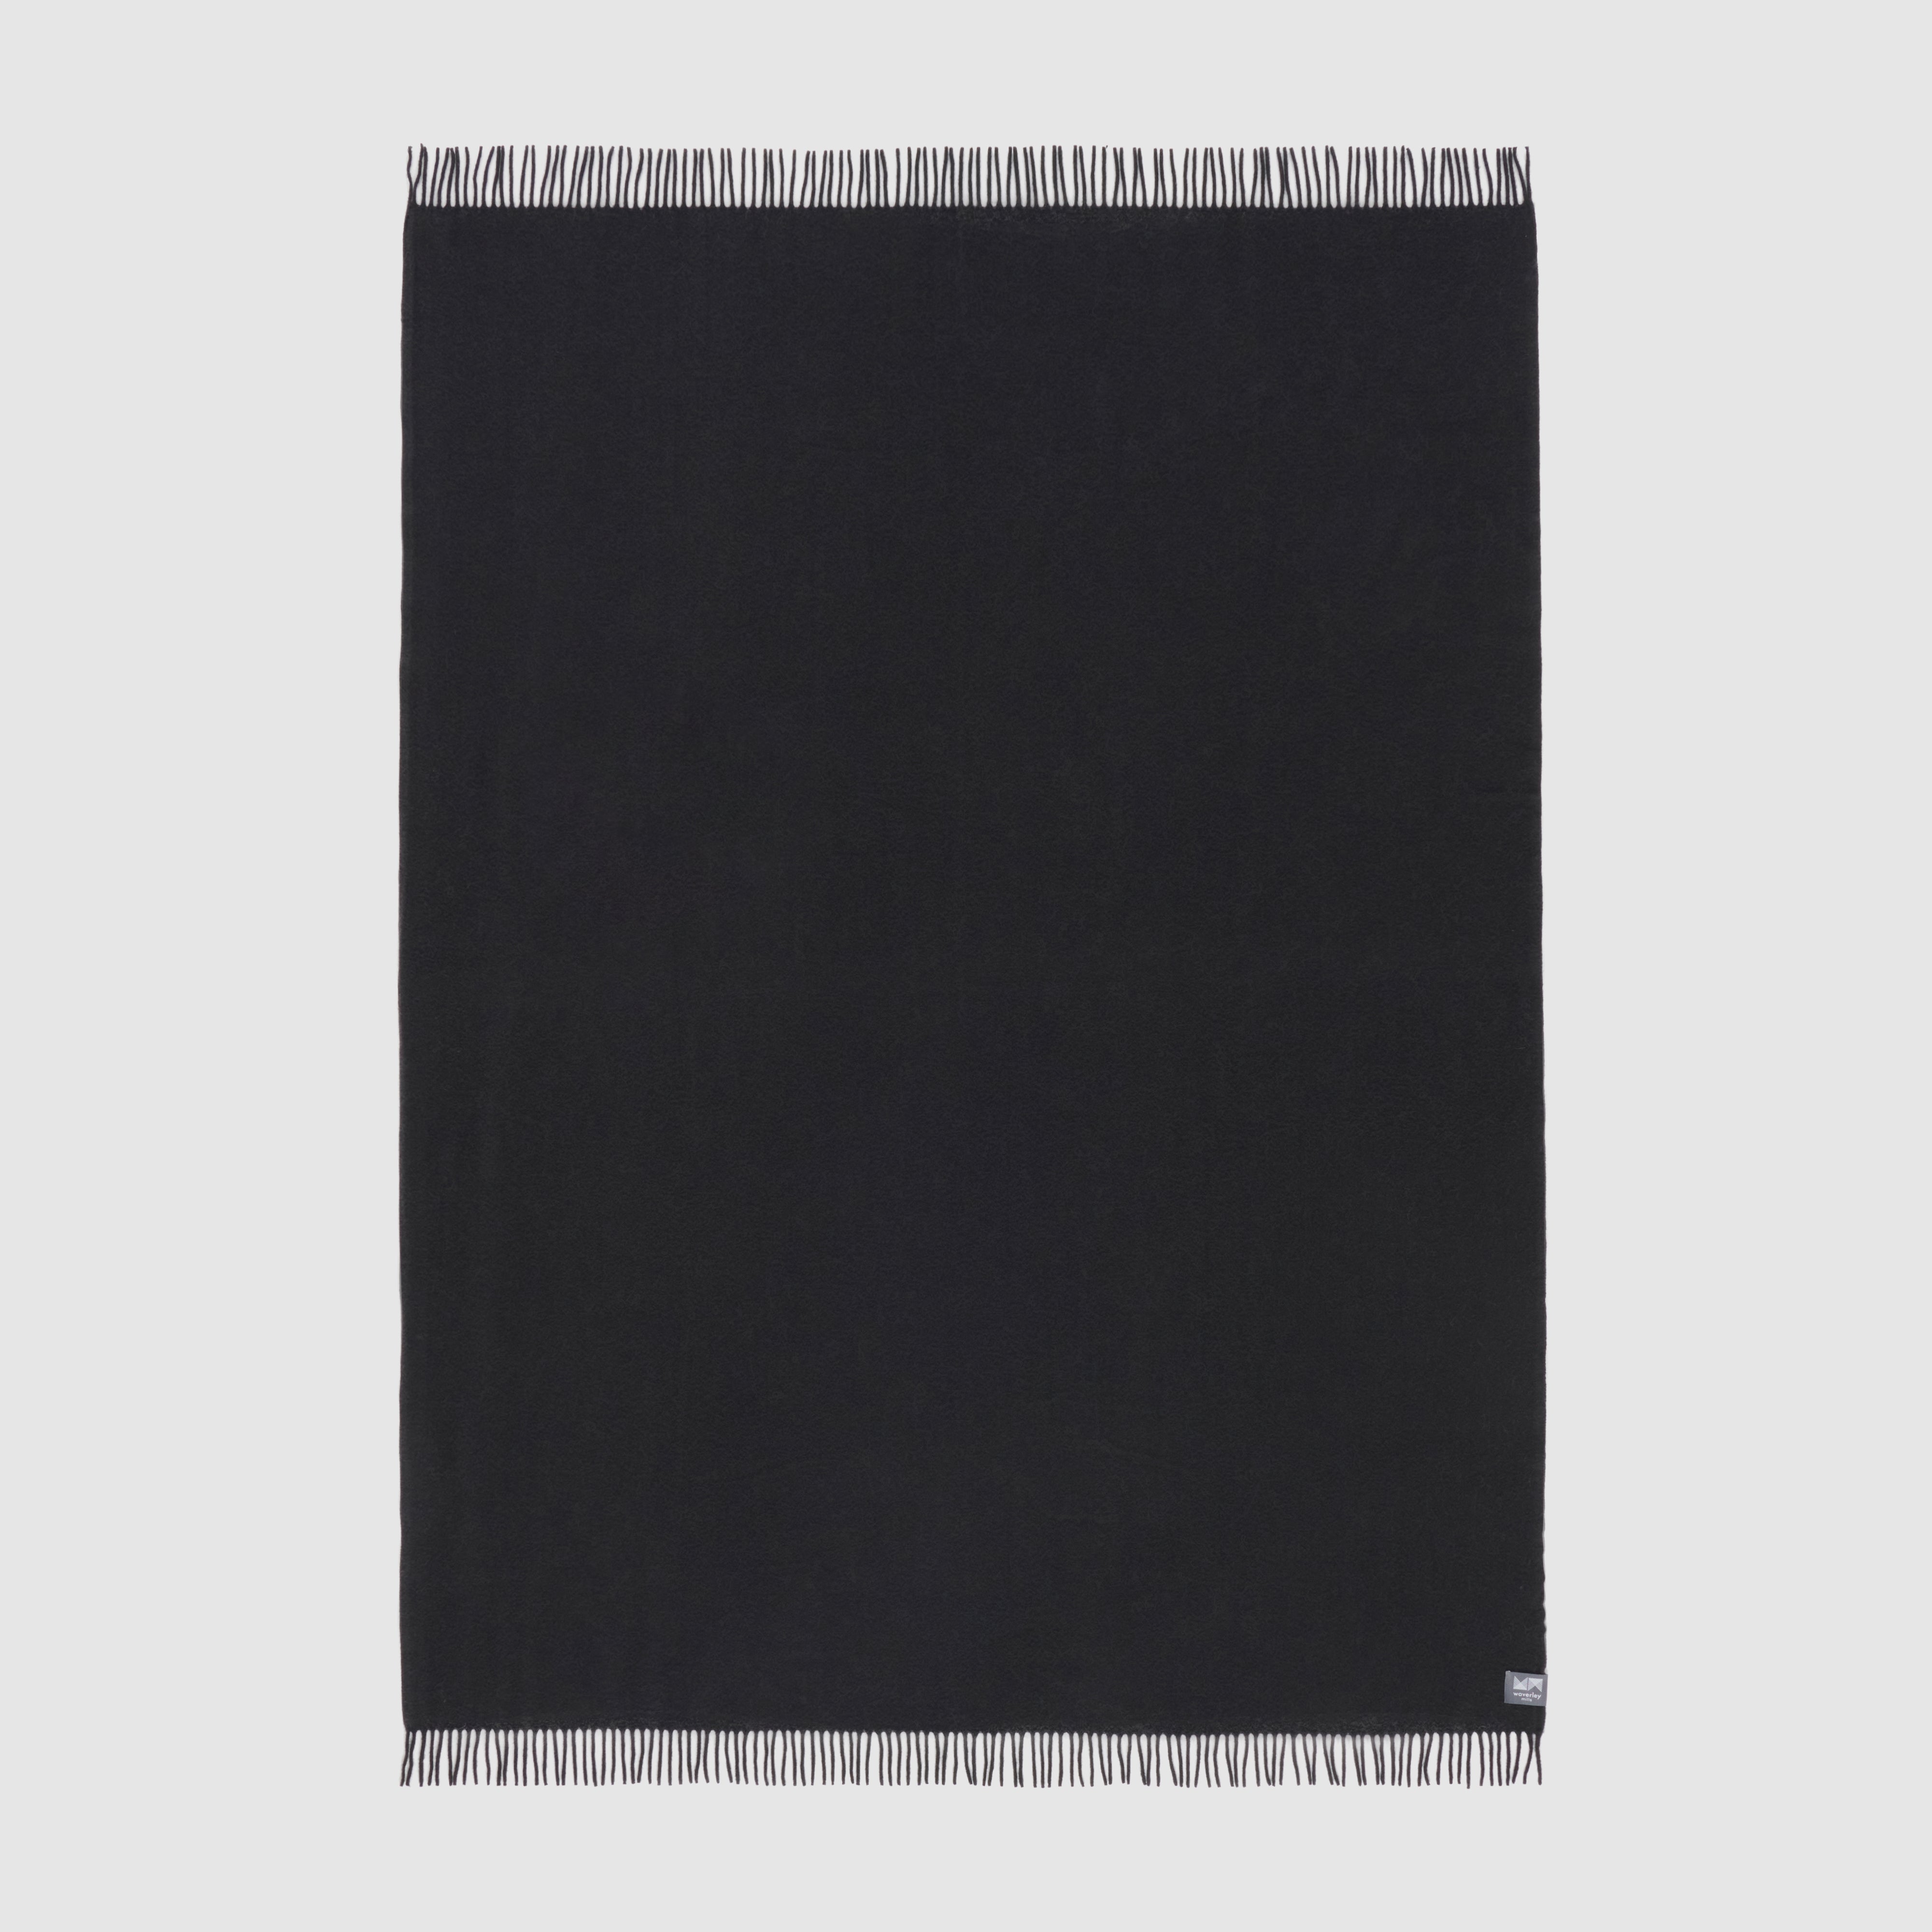 Full view of essential throw in solid charcoal black.